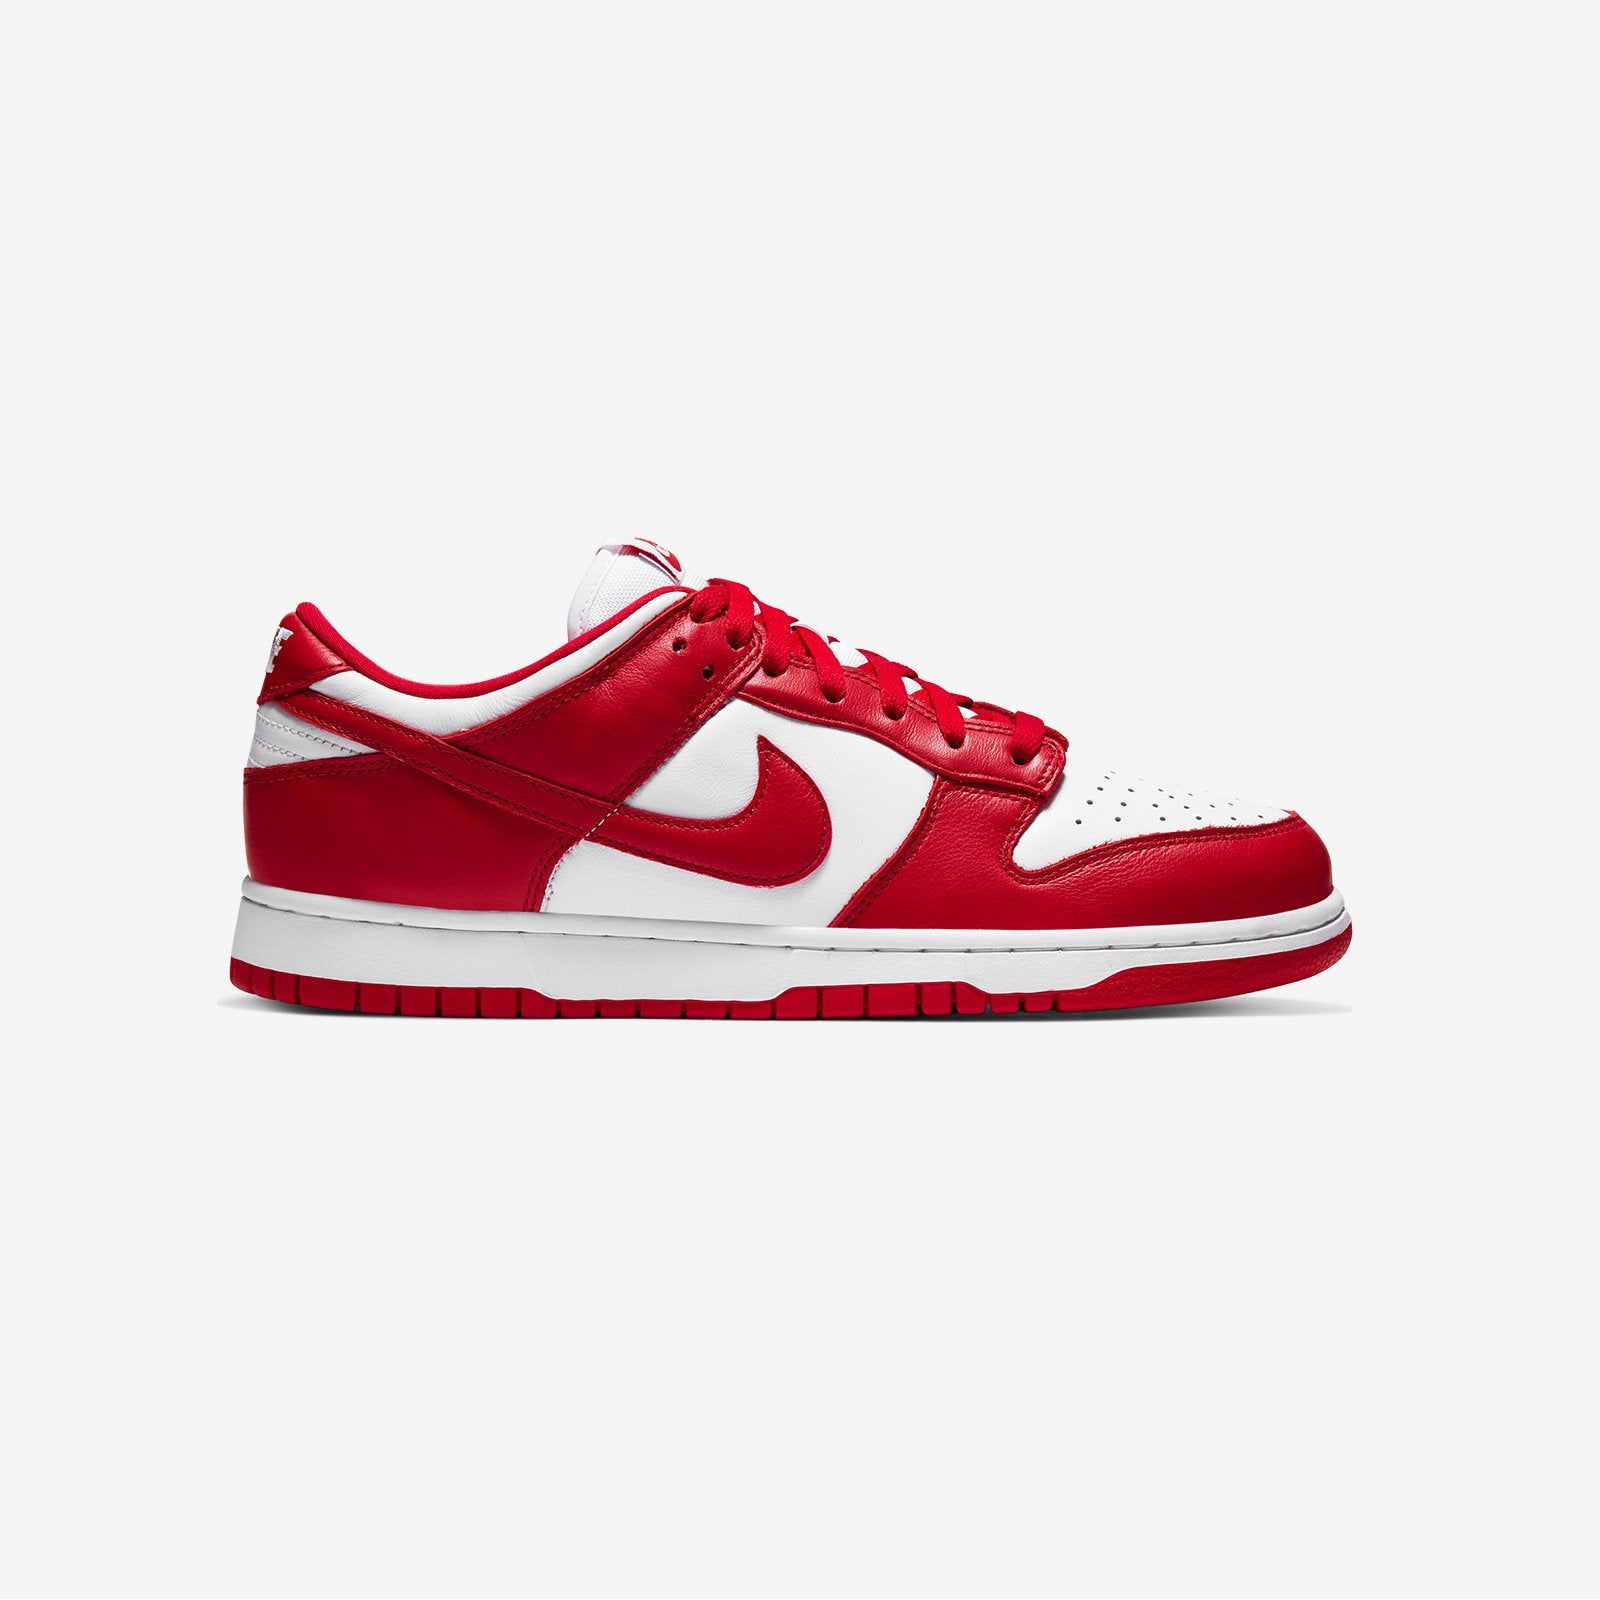 Dunk Low SP "University Red"